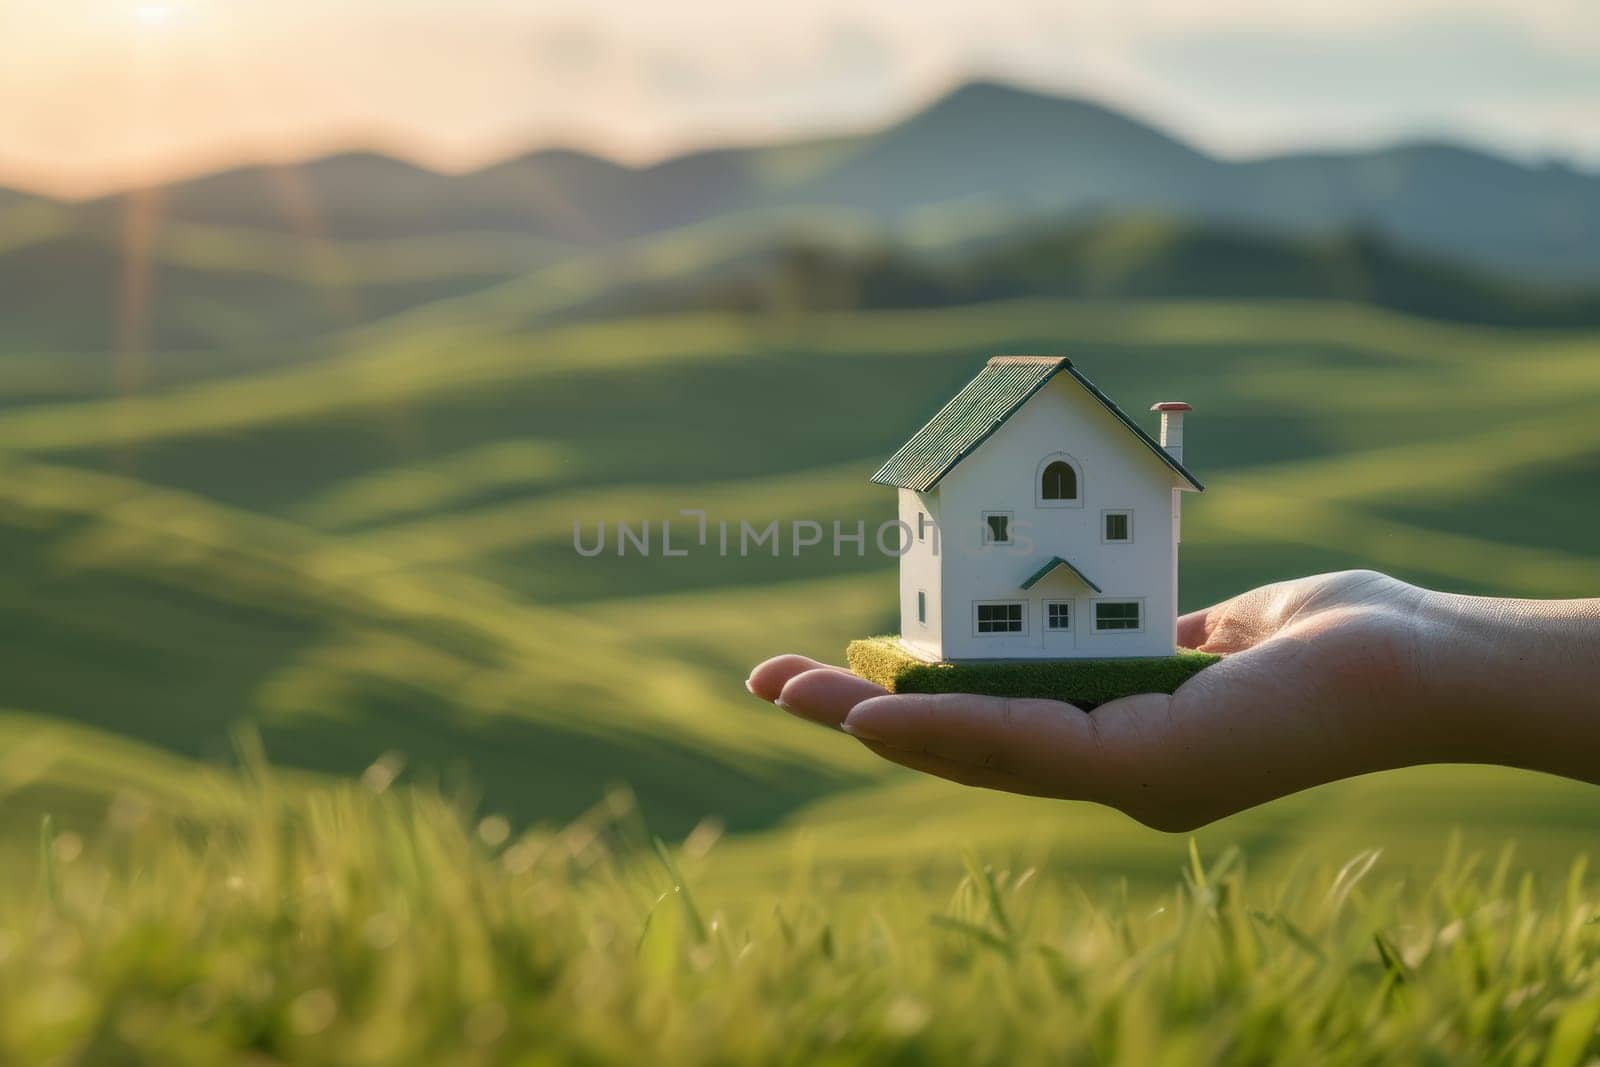 Concept of buying or building new home. Humen hand showing, offering a new dream house at the green field with copy space.